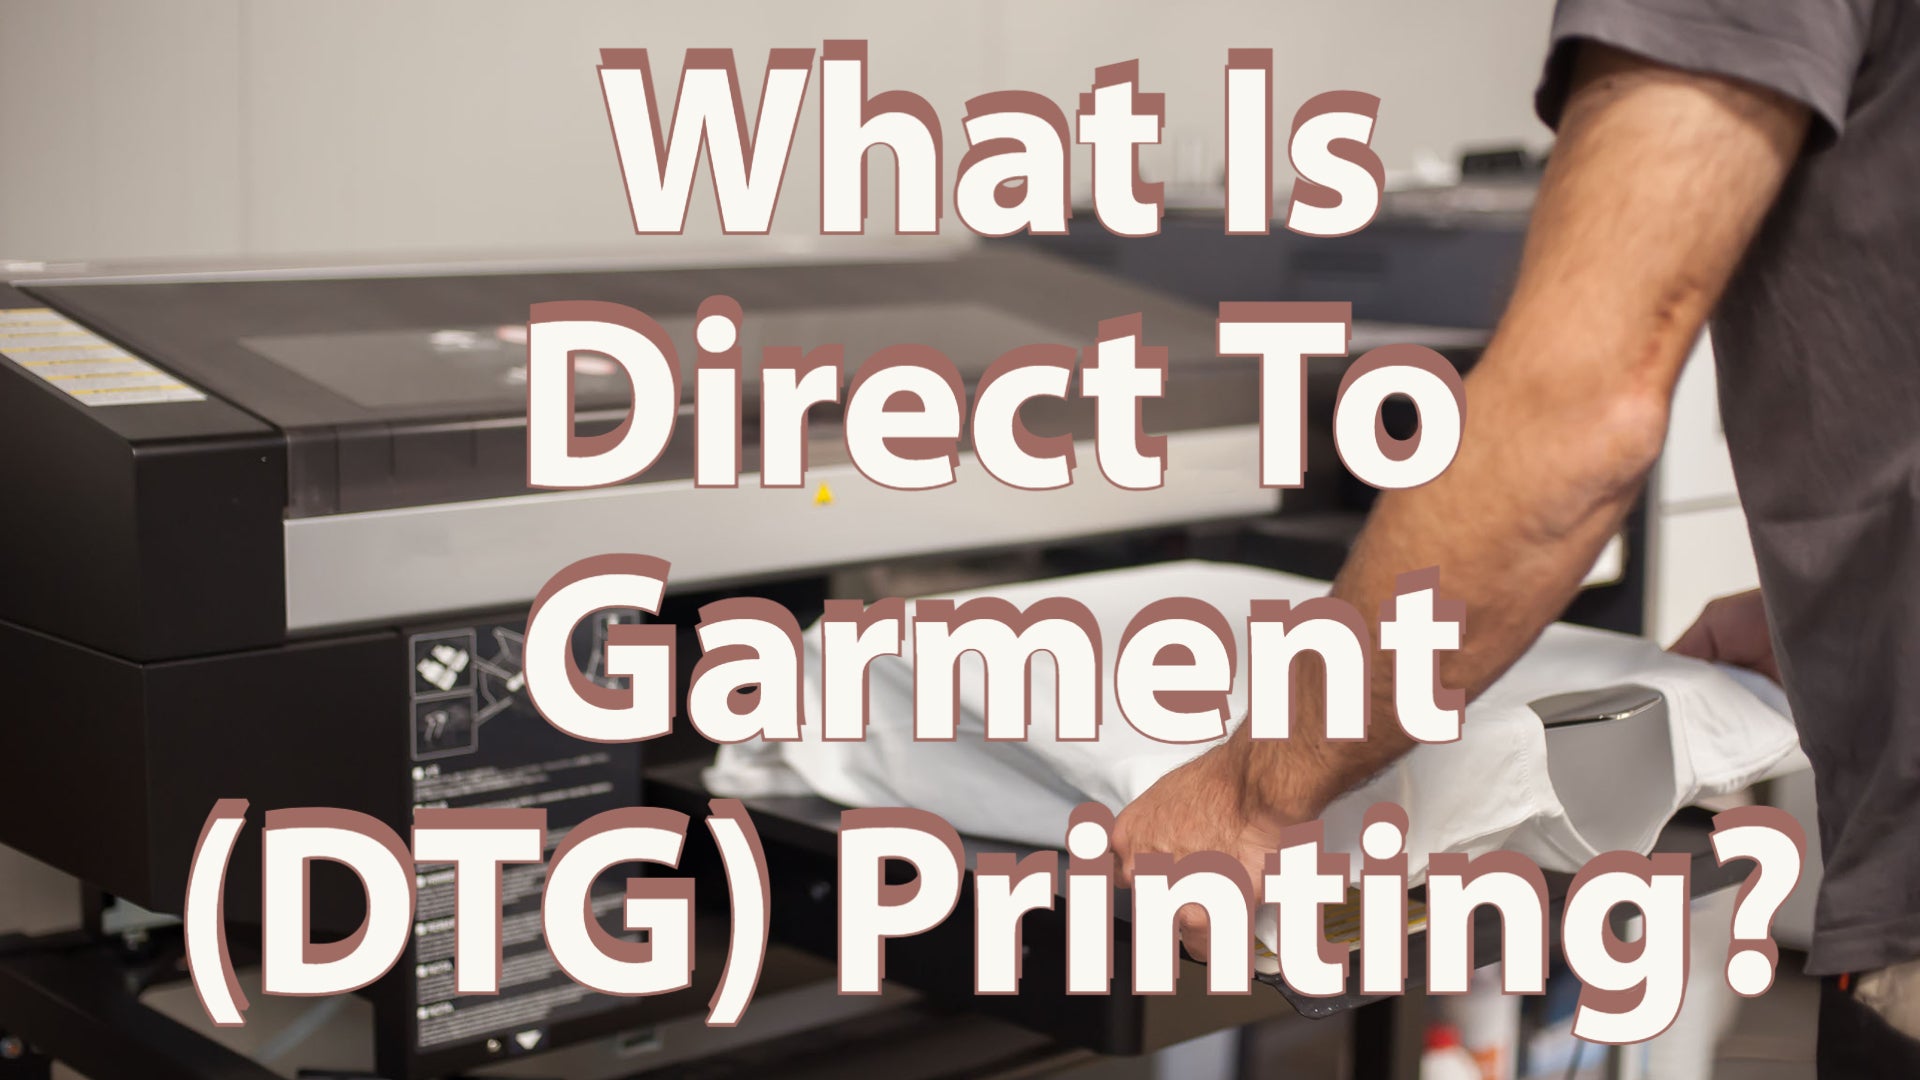 Direct To Garment (DTG) Printing